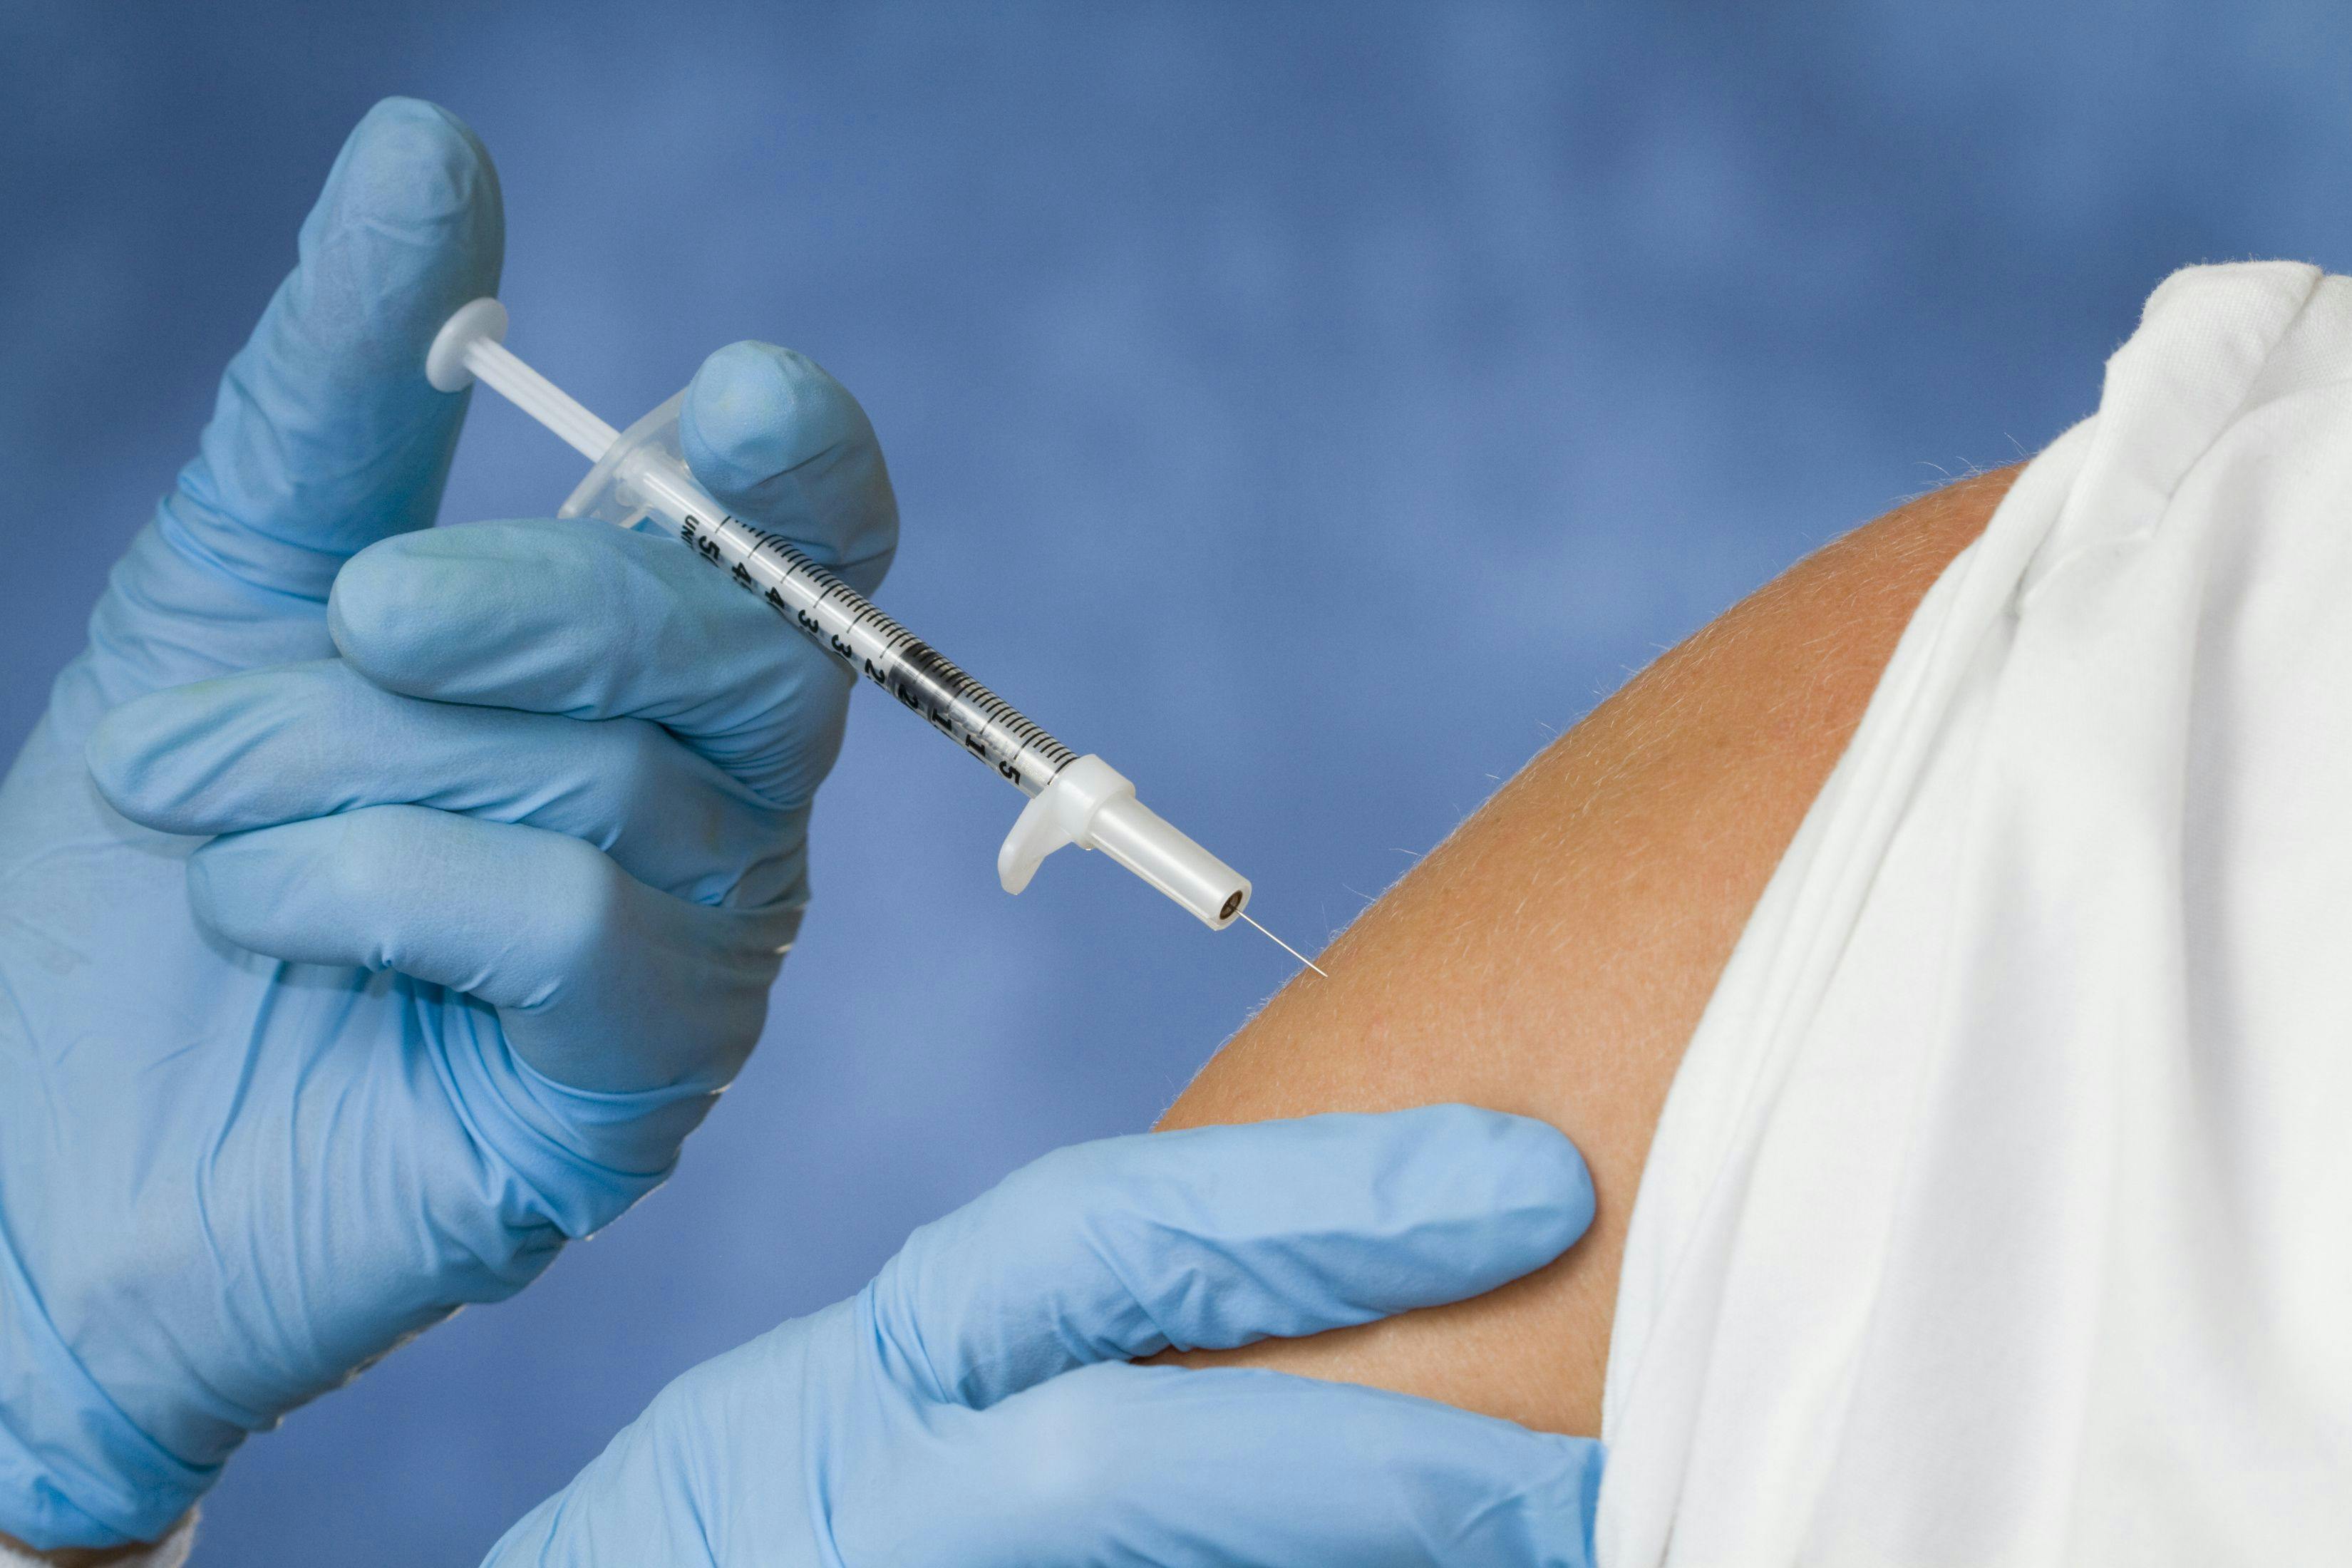 Cancer Organizations Implore Health Care Employers to Mandate COVID-19 Vaccines